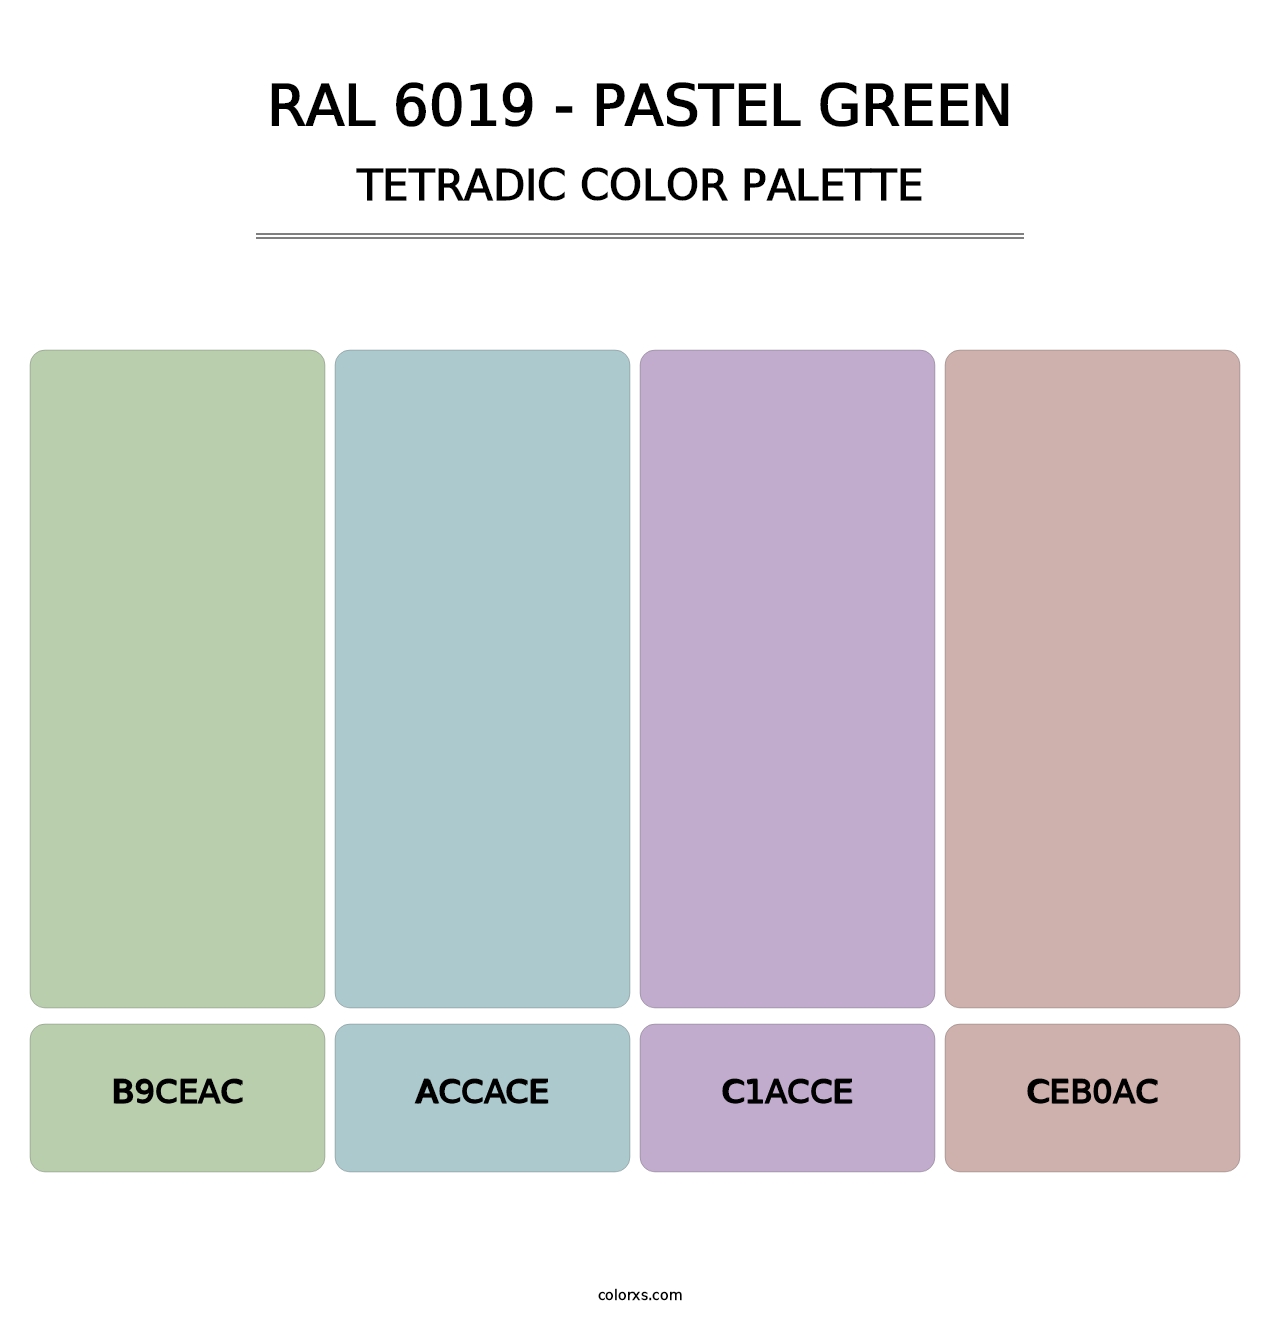 RAL 6019 - Pastel Green - Tetradic Color Palette